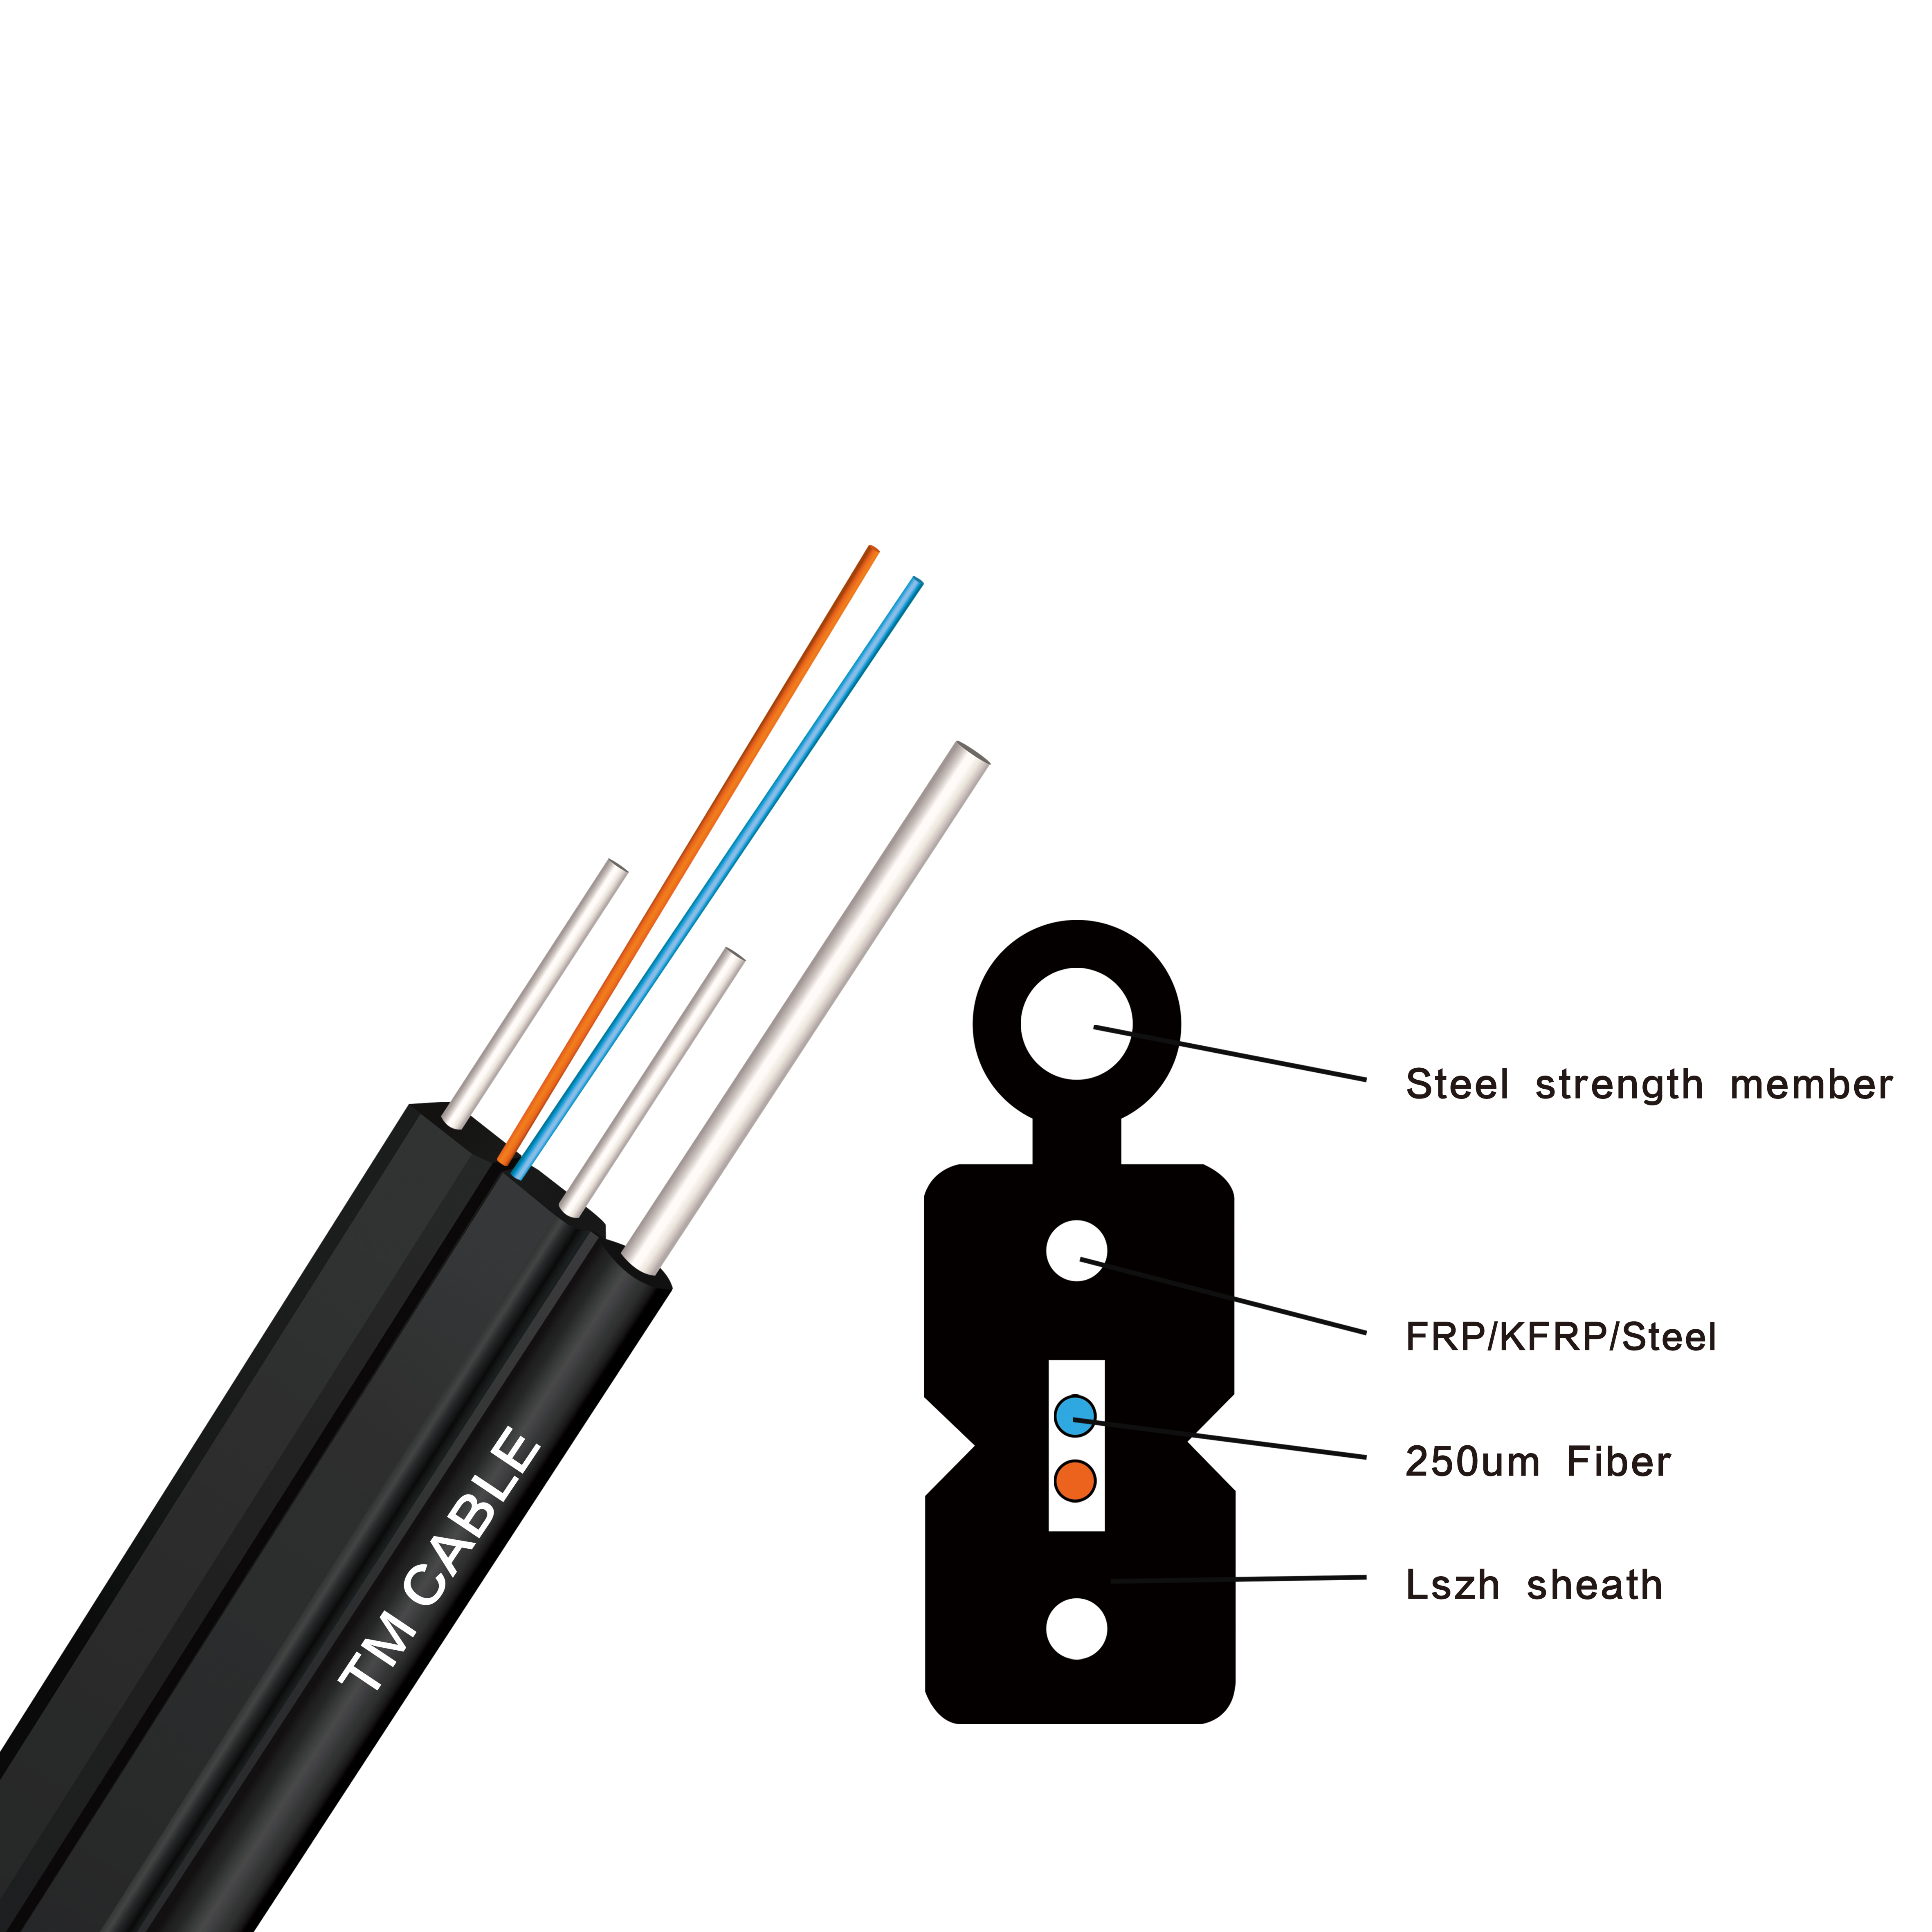 Self-Supporting Brow-Type Drop Cable GJYXFCH